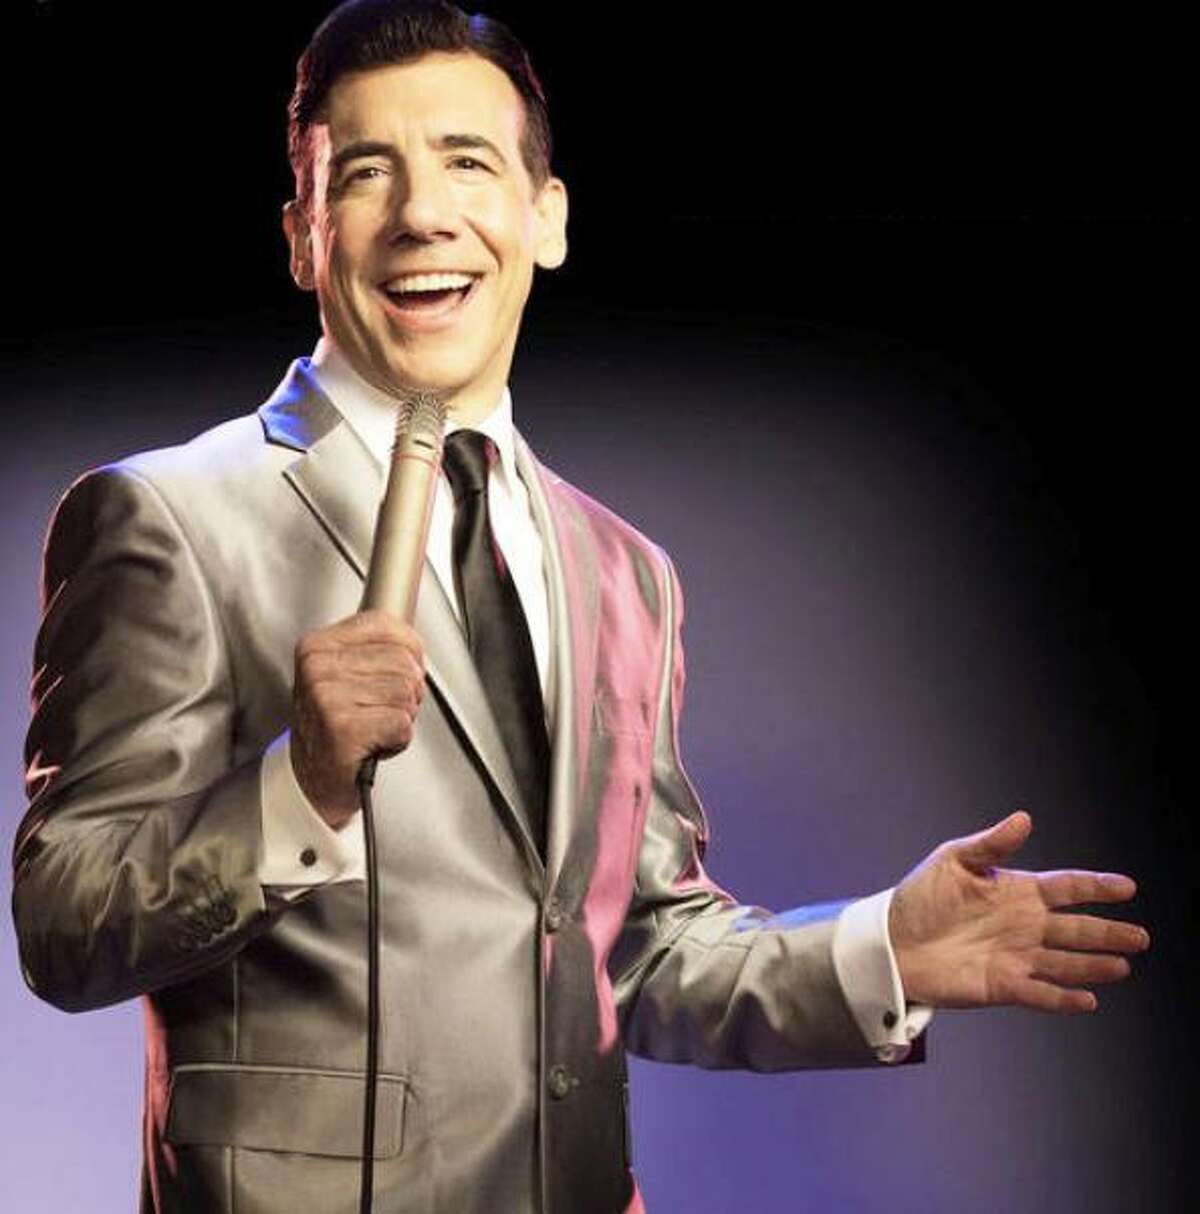 Chaz Esposito stars in “Mack is Back! The Music of Bobby Darin” at Legacy Theatre in Branford through this weekend.